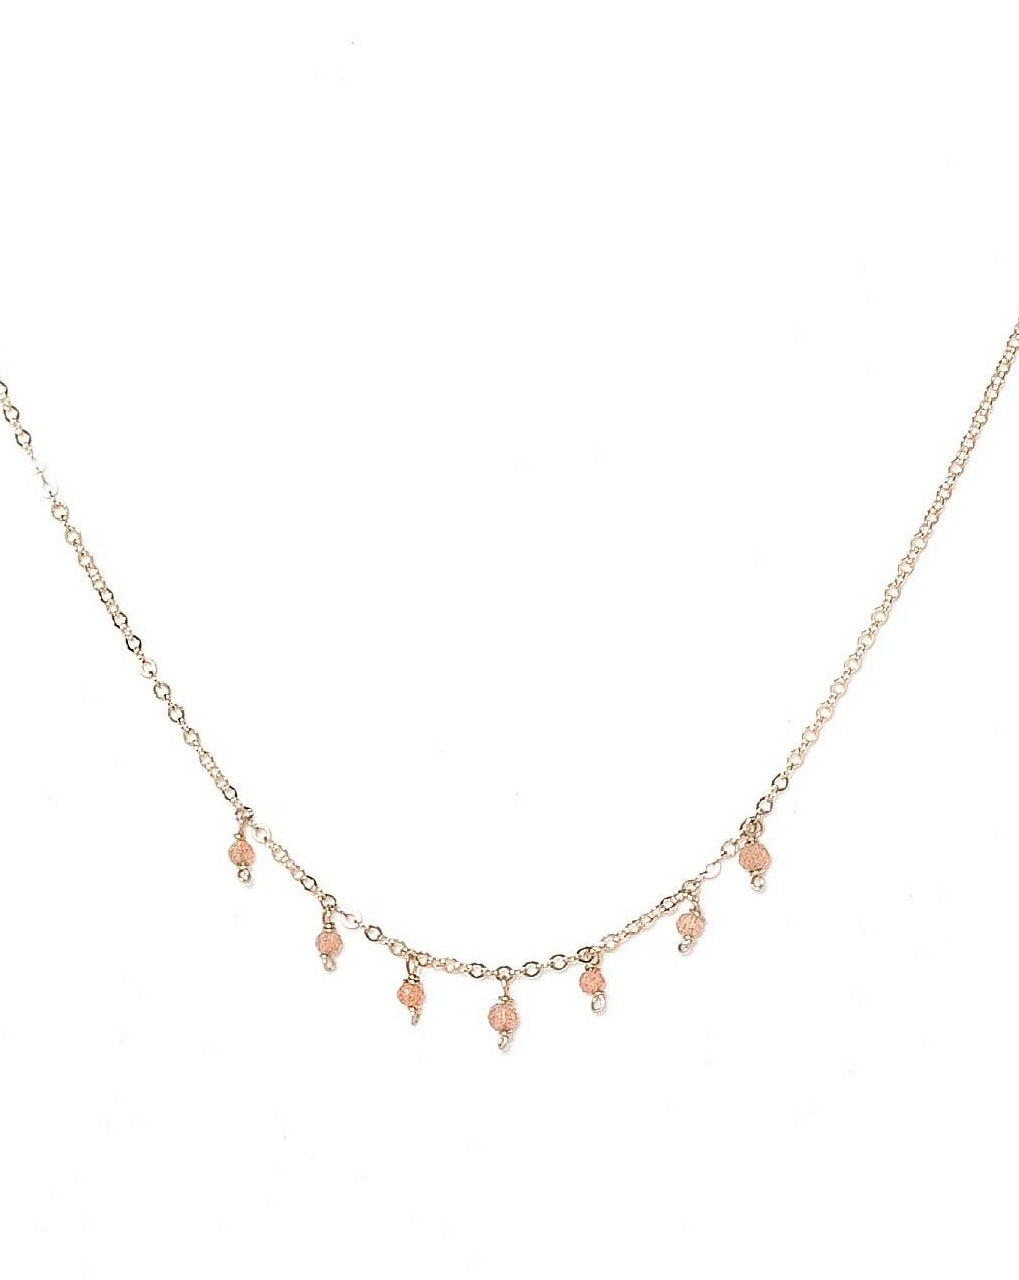 Cuy Necklace by KOZAKH. A 16 to 18 inch adjustable length necklace in 14K Gold Filled, featuring 2mm faceted round Peach Moonstones.